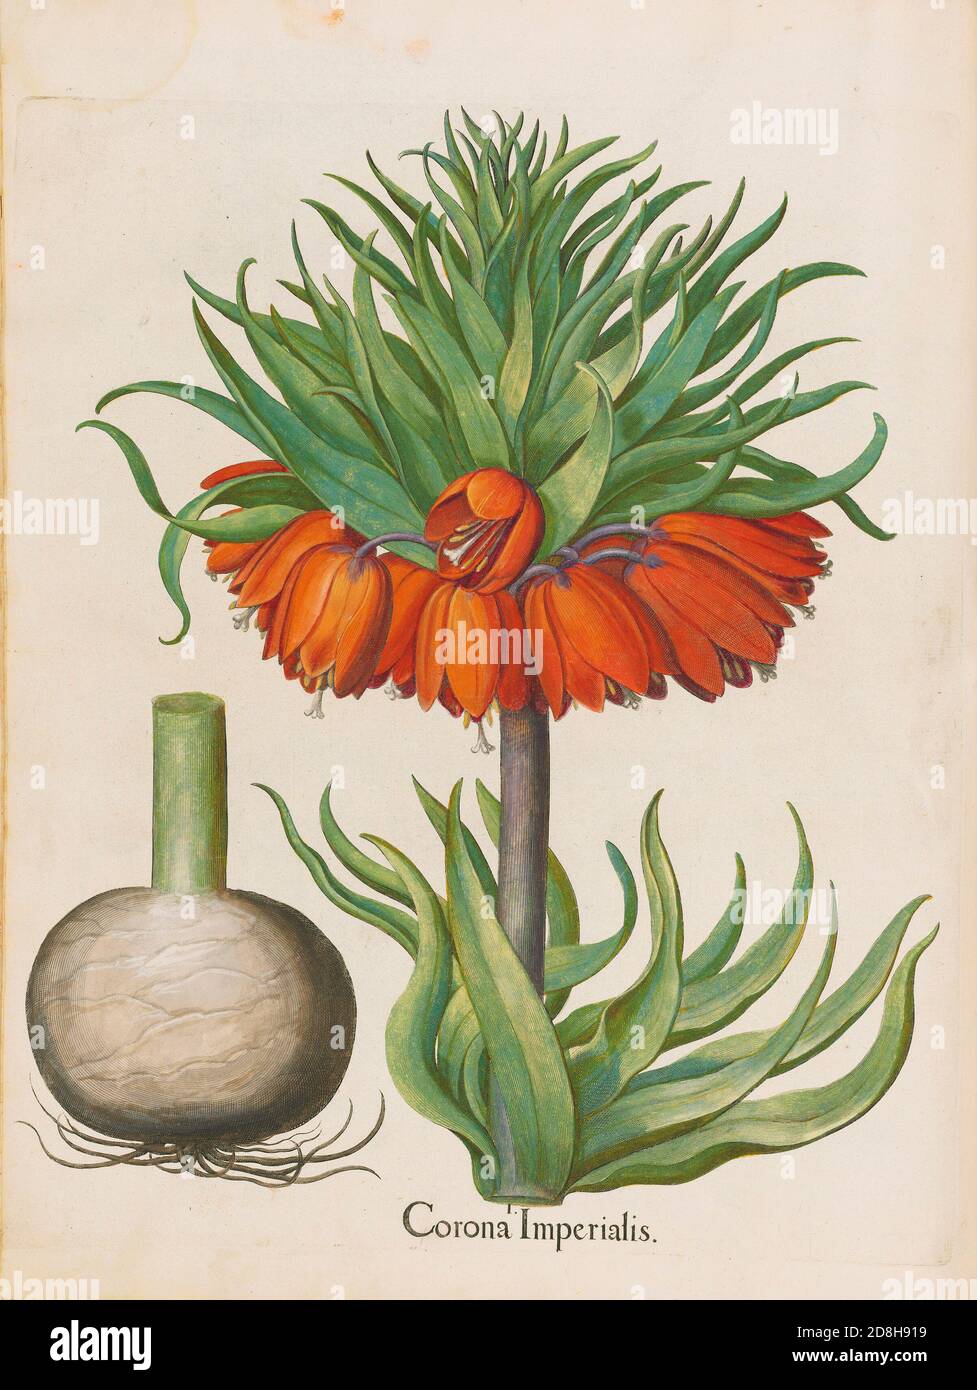 Corona Imperialis. Fritillaria imperialis. Basil Besler from the book Hortus Eystettensis, full of  classic illustrations. 1613. Stock Photo